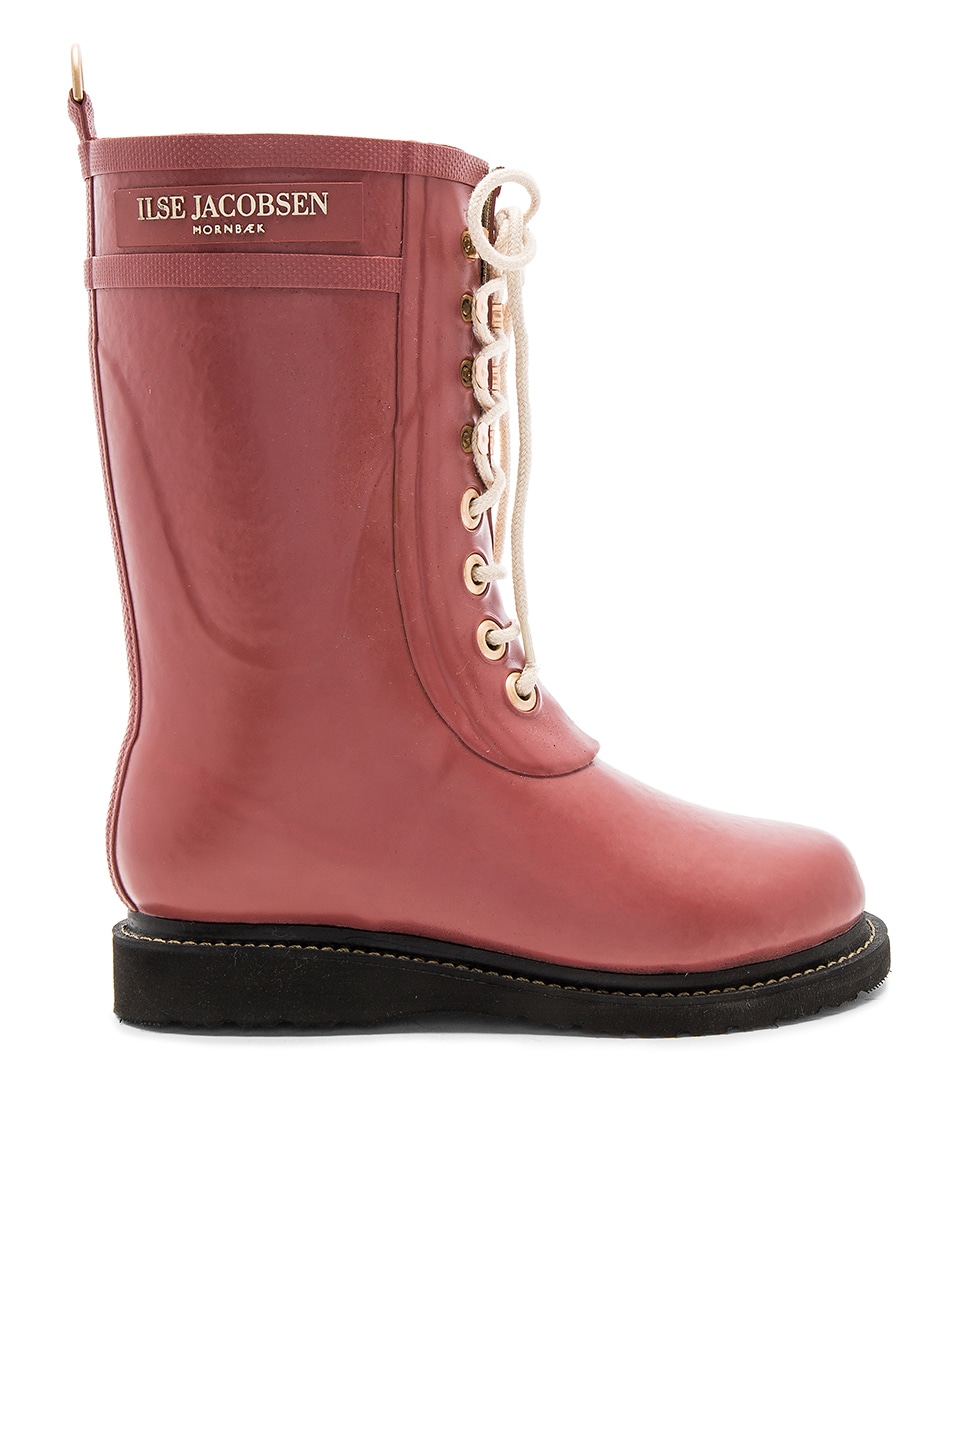 ILSE JACOBSEN Always A Classic Boot in Rouge | REVOLVE